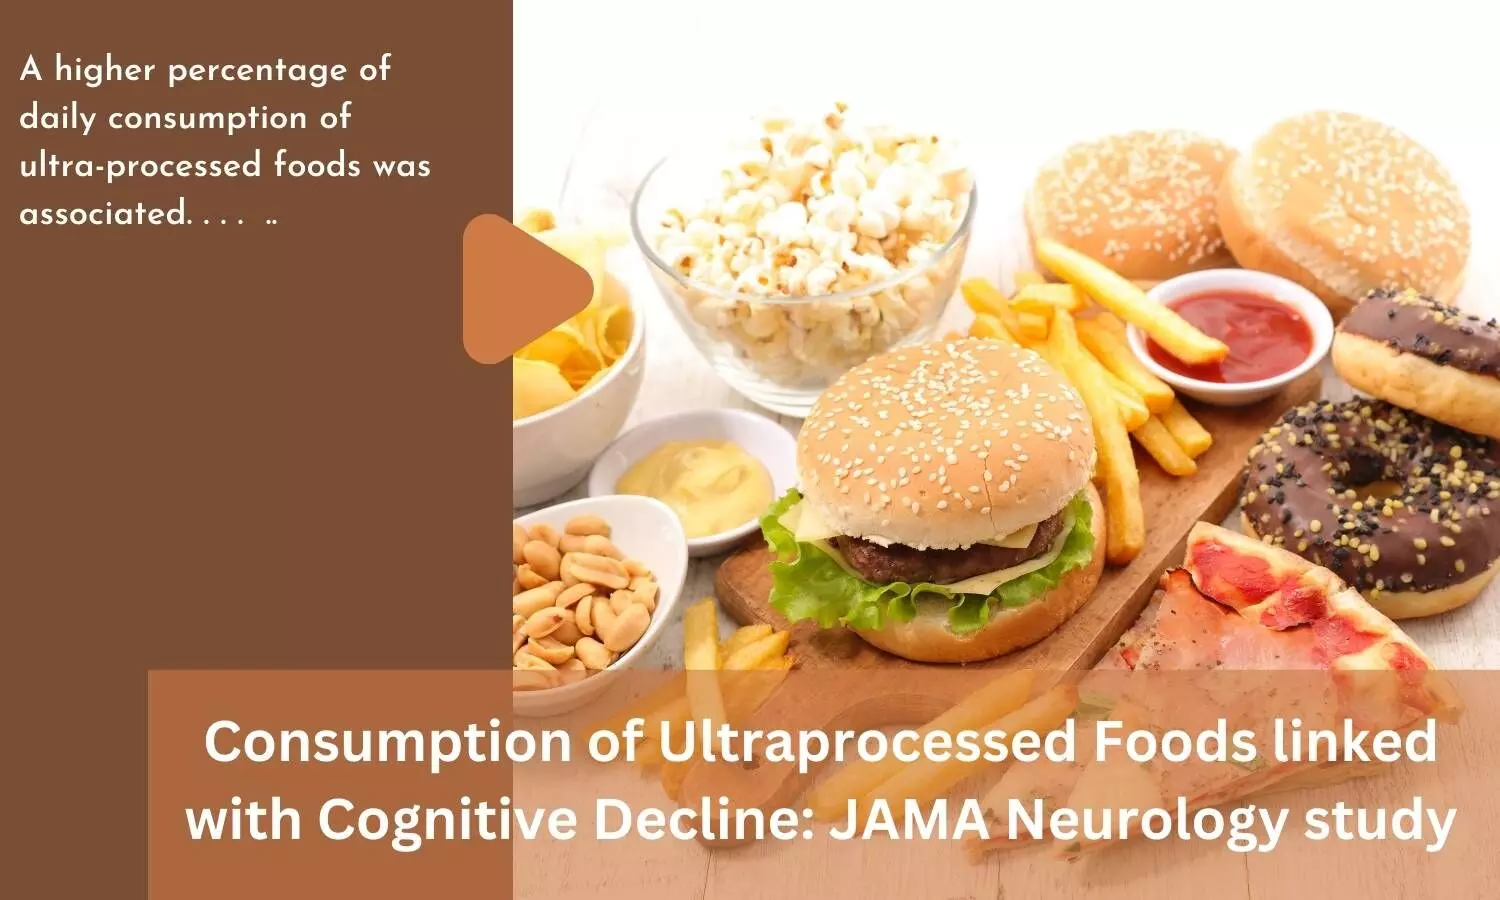 Consumption of Ultraprocessed Foods linked with Cognitive Decline: JAMA Neurology study